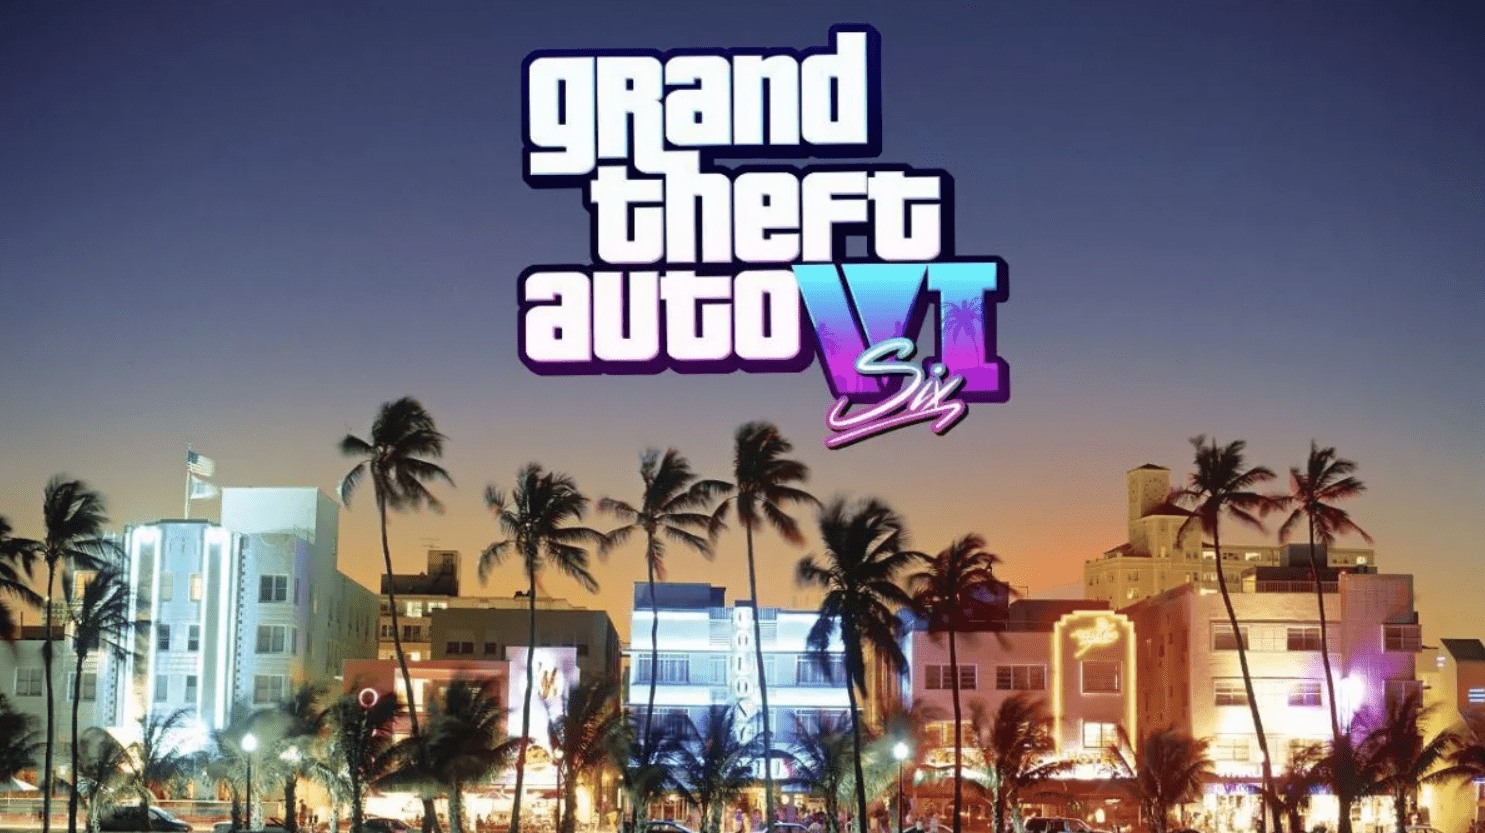 Players discover possible new locations in “leaked” GTA 6 Vice